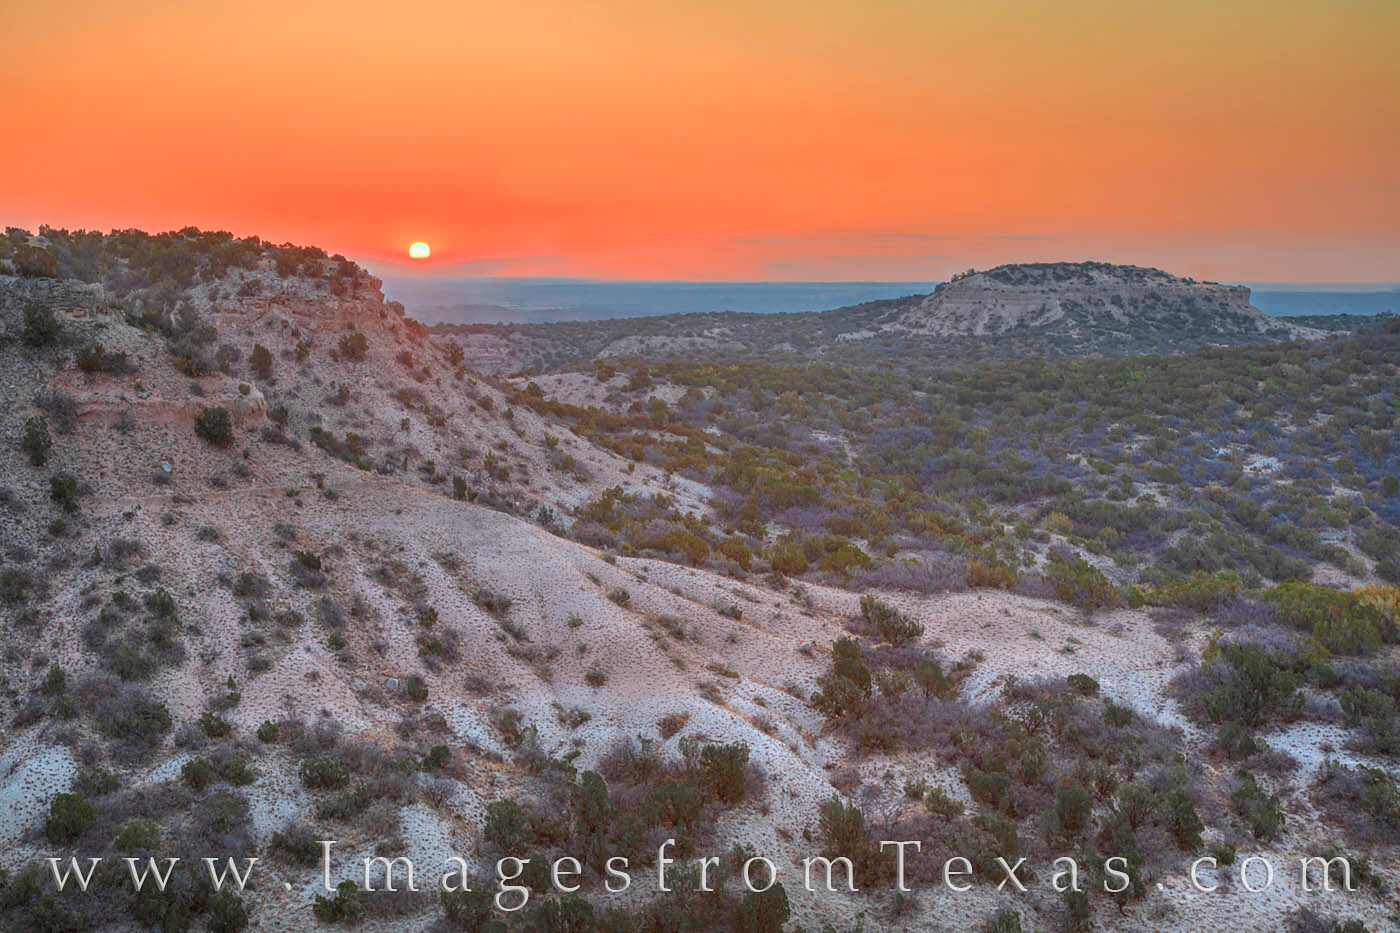 From high up on the Upper South Prong Trail in Caprock Canyons State Park, the views on a cold May morning at sunrise were pretty...